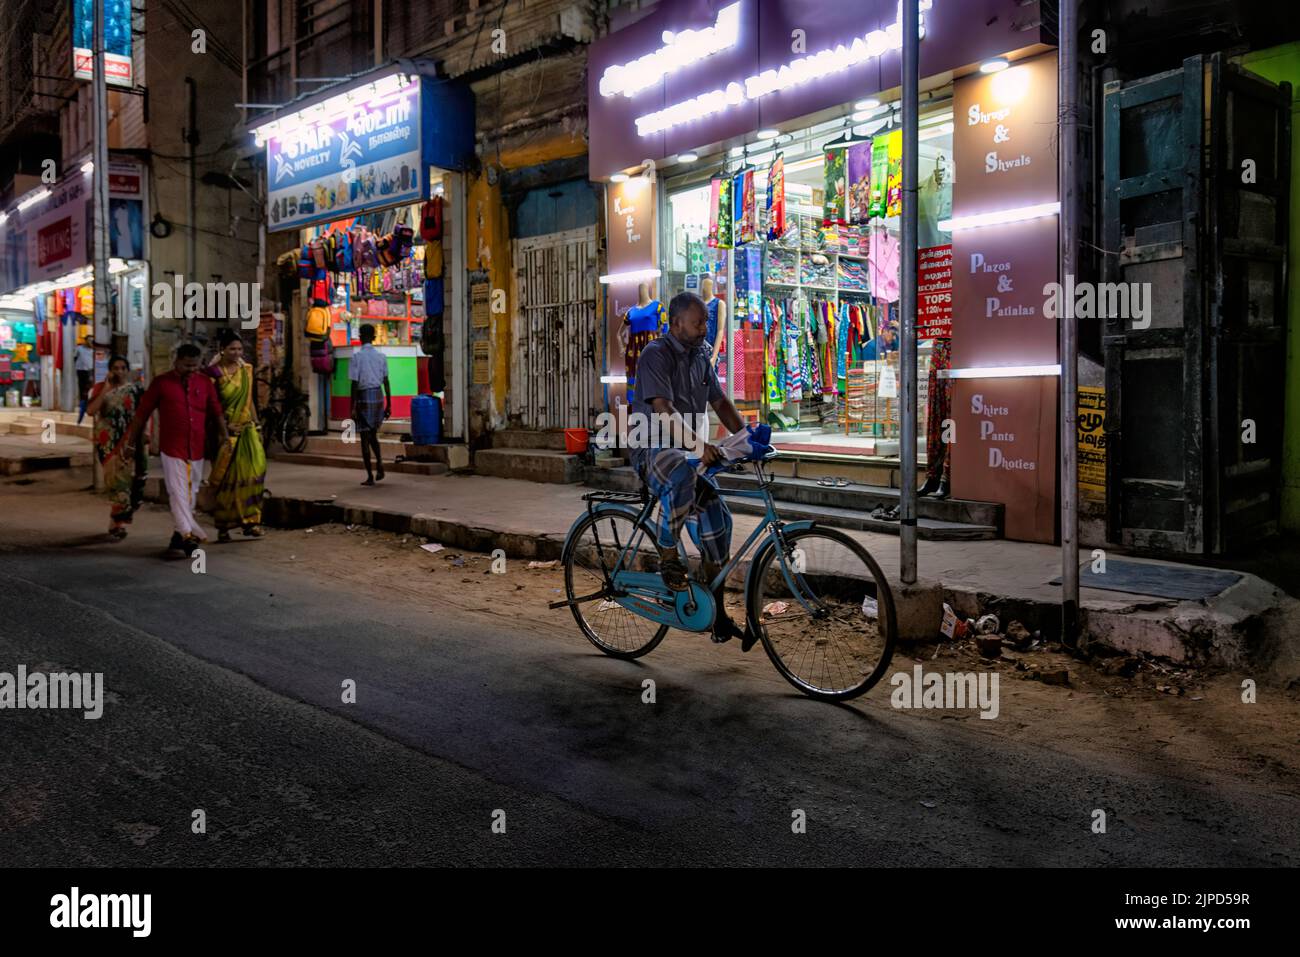 Madurai, India - August 23, 2018: Night view of a Madurai street with illuminated stores and people. Madurai is an important city of Tamil Nadu Stock Photo